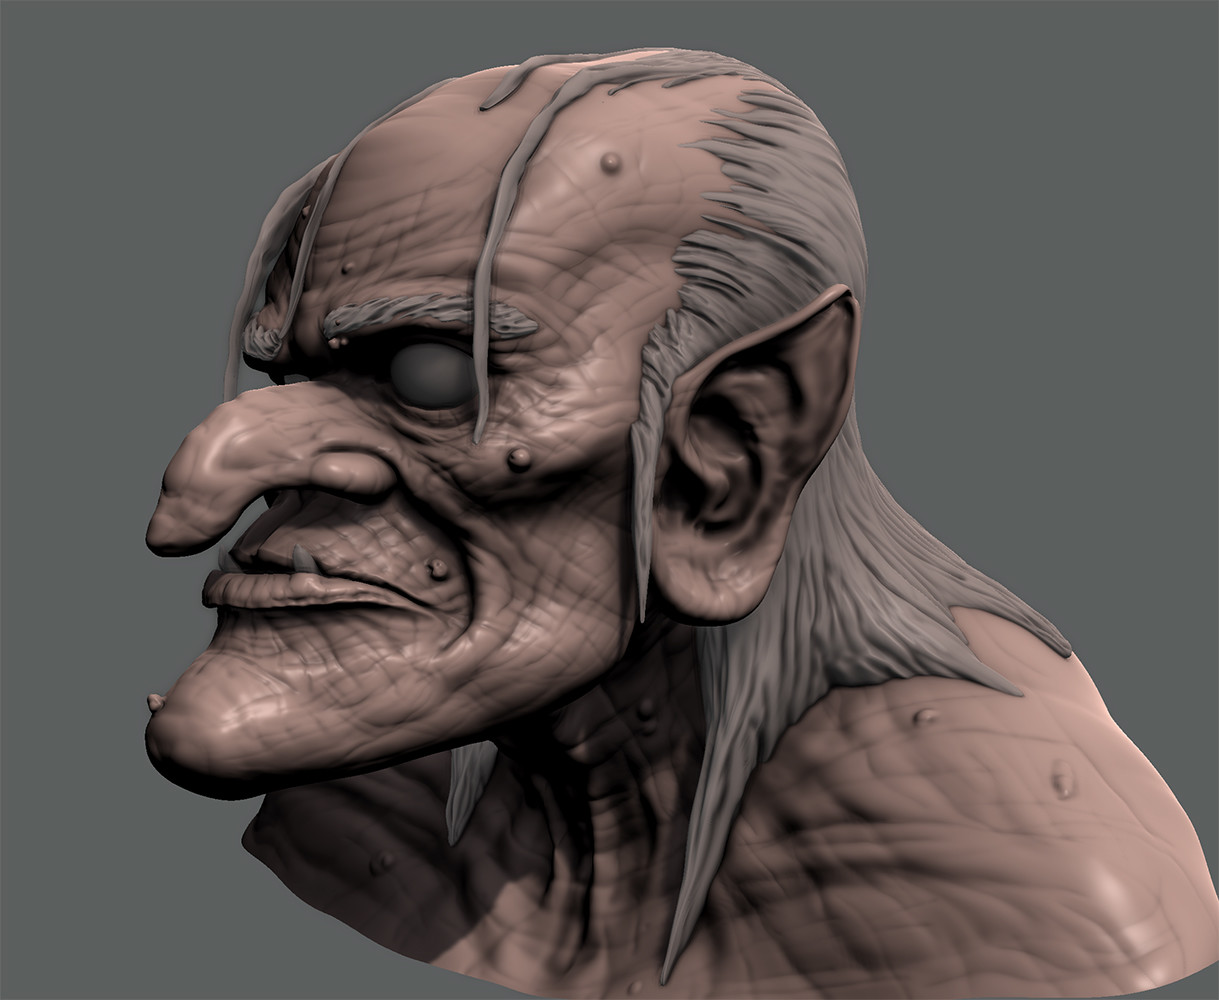 Halloween Witch  Mudbox Sculpt.  Still learning the ins/outs of Mudbox...this one took around 6 hours.